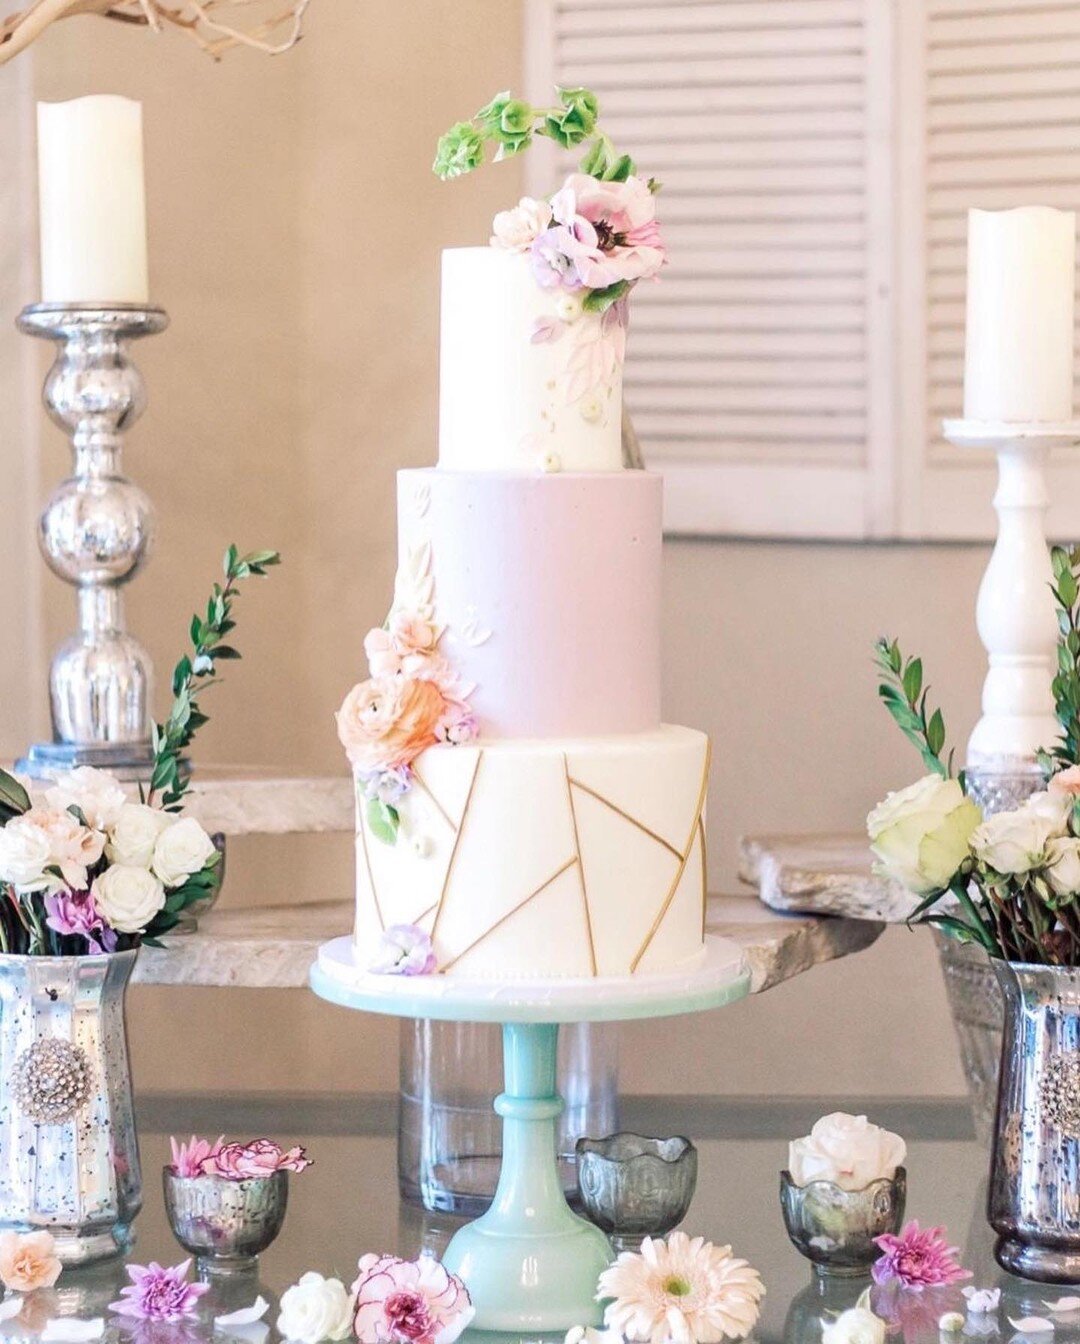 Frostin' absolutely NAILED this gorgeous lavender and spring color coded cake! My heart is just SINGING!
@frostinatx 
#nontraditionalwedding #uniquewedding #texaswedding #austinwedding #sanantoniowedding #hillcountrywedding #texashillcountrywedding #